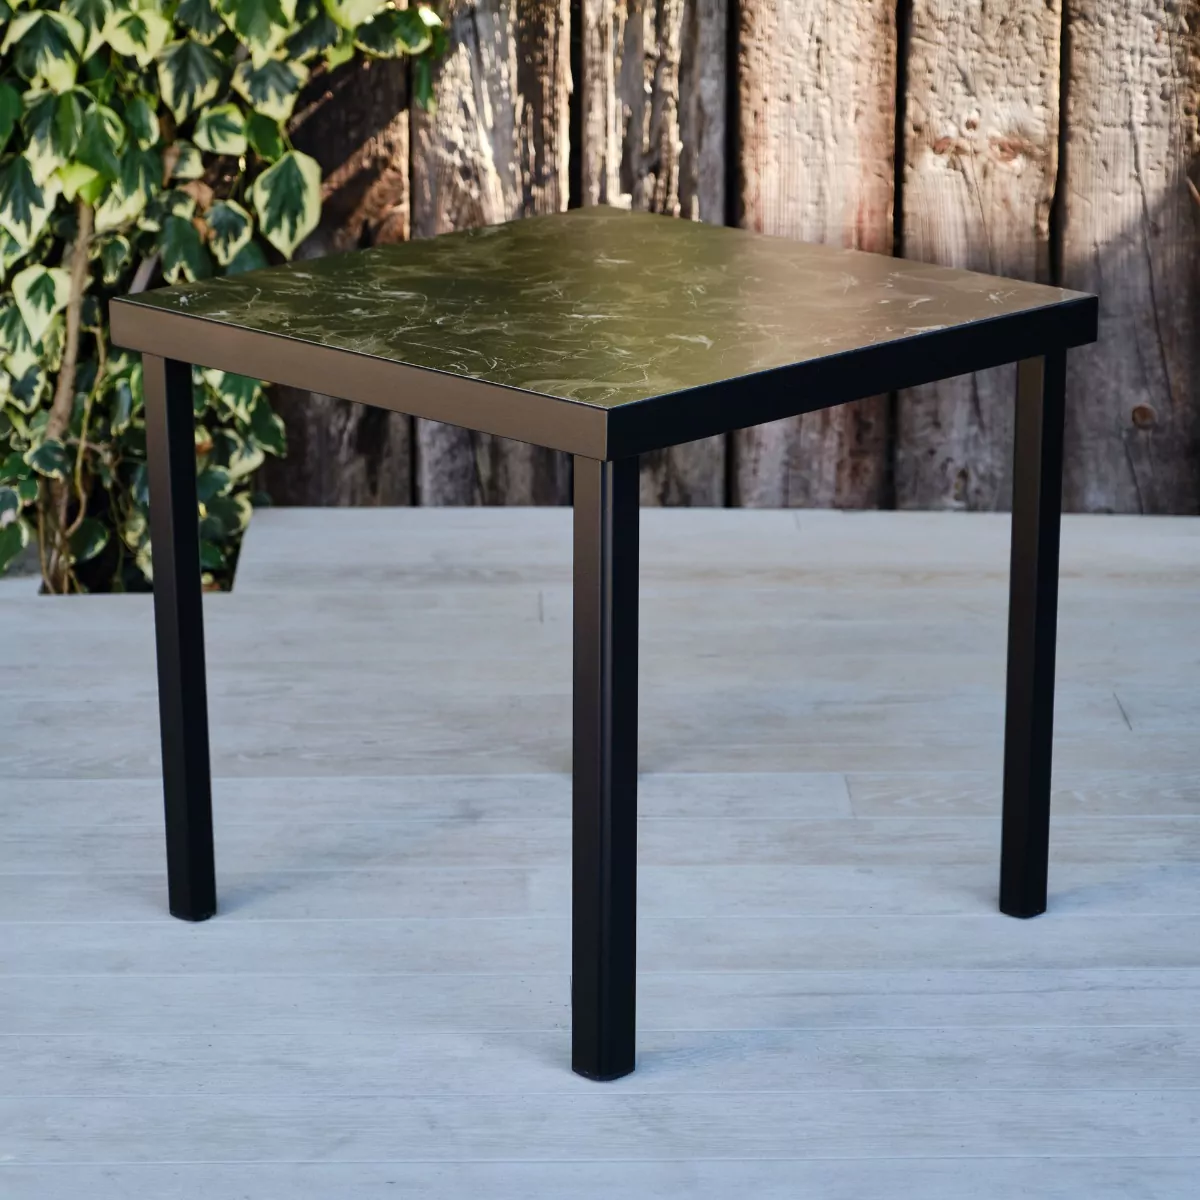 Epping Outdoor & Indoor Square Black Marble Effect Table